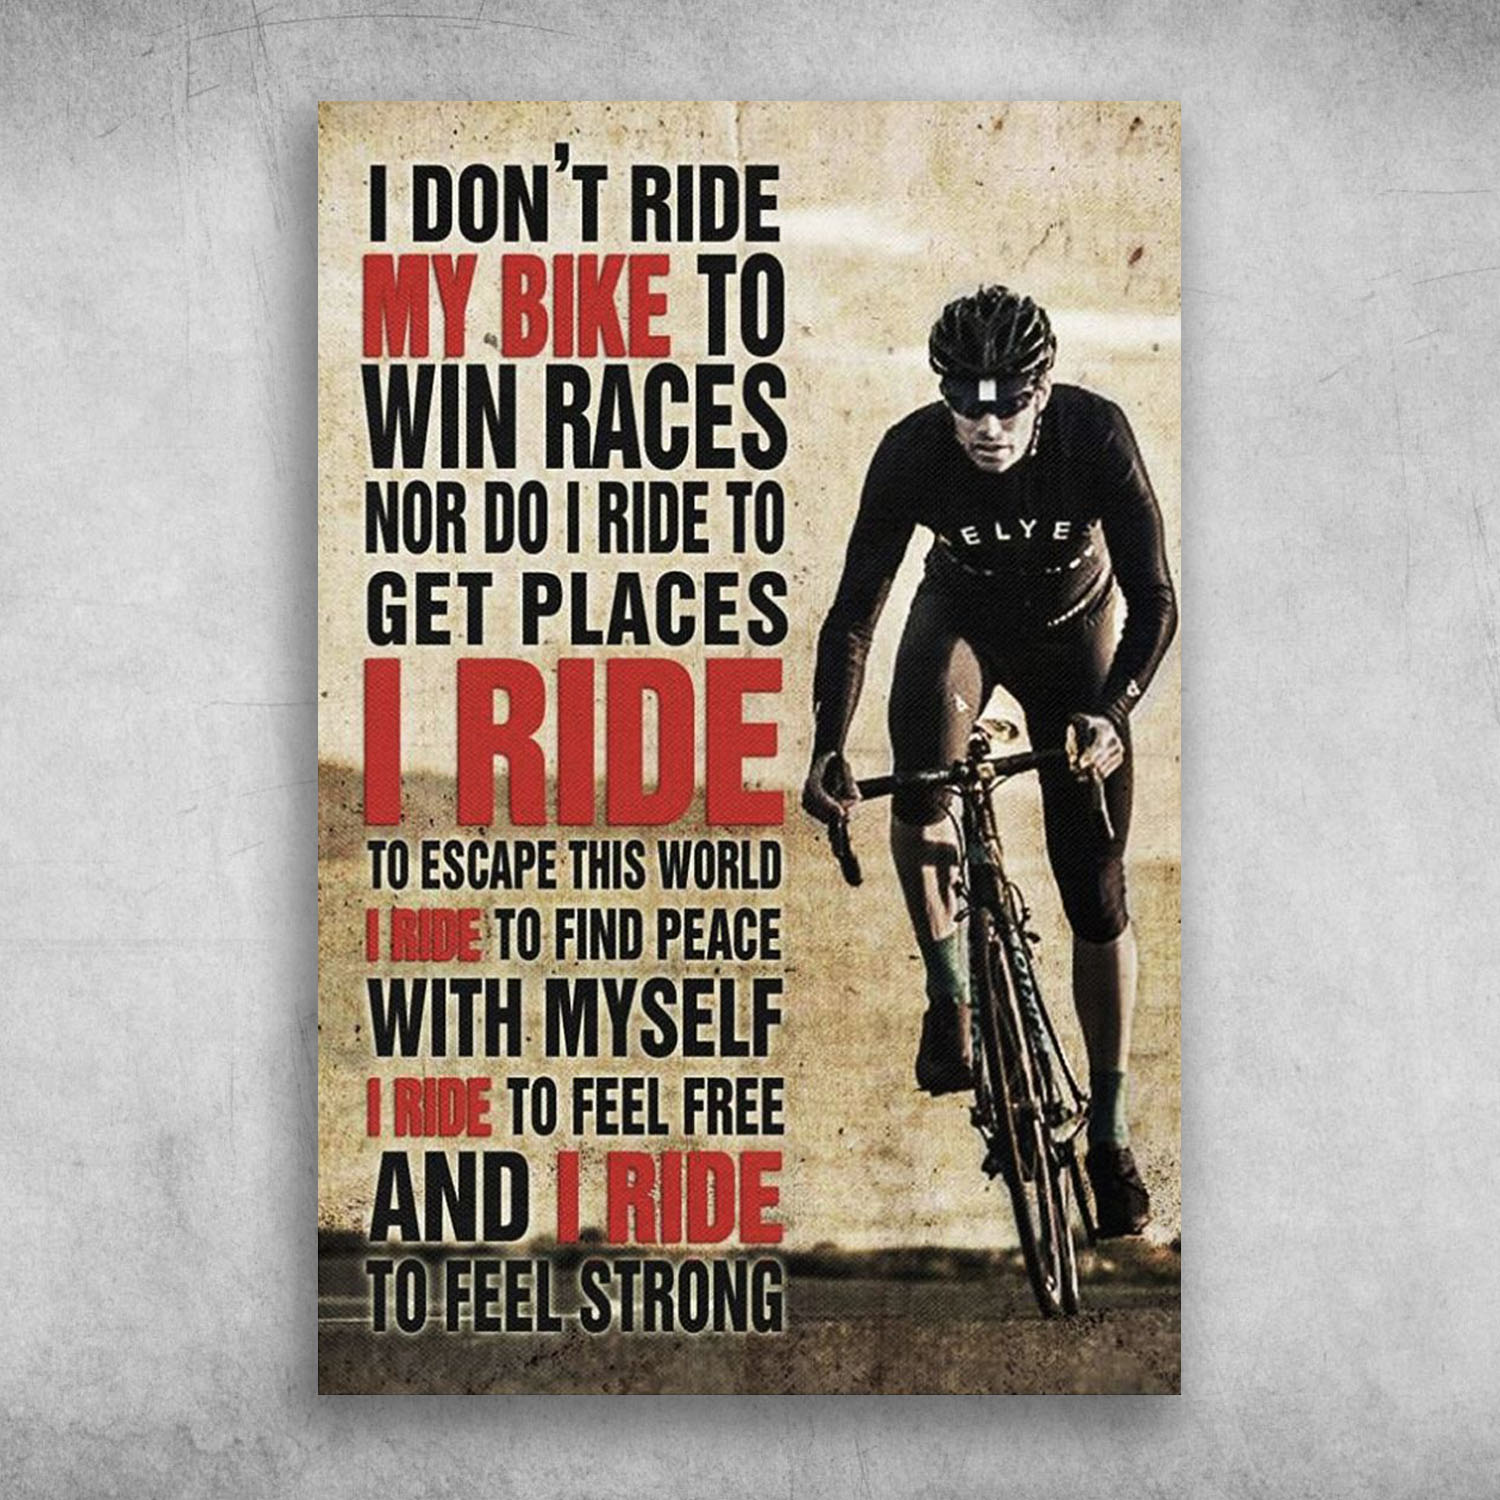 I Don't Ride My Bike To Win Races And I Ride To Feel Strong